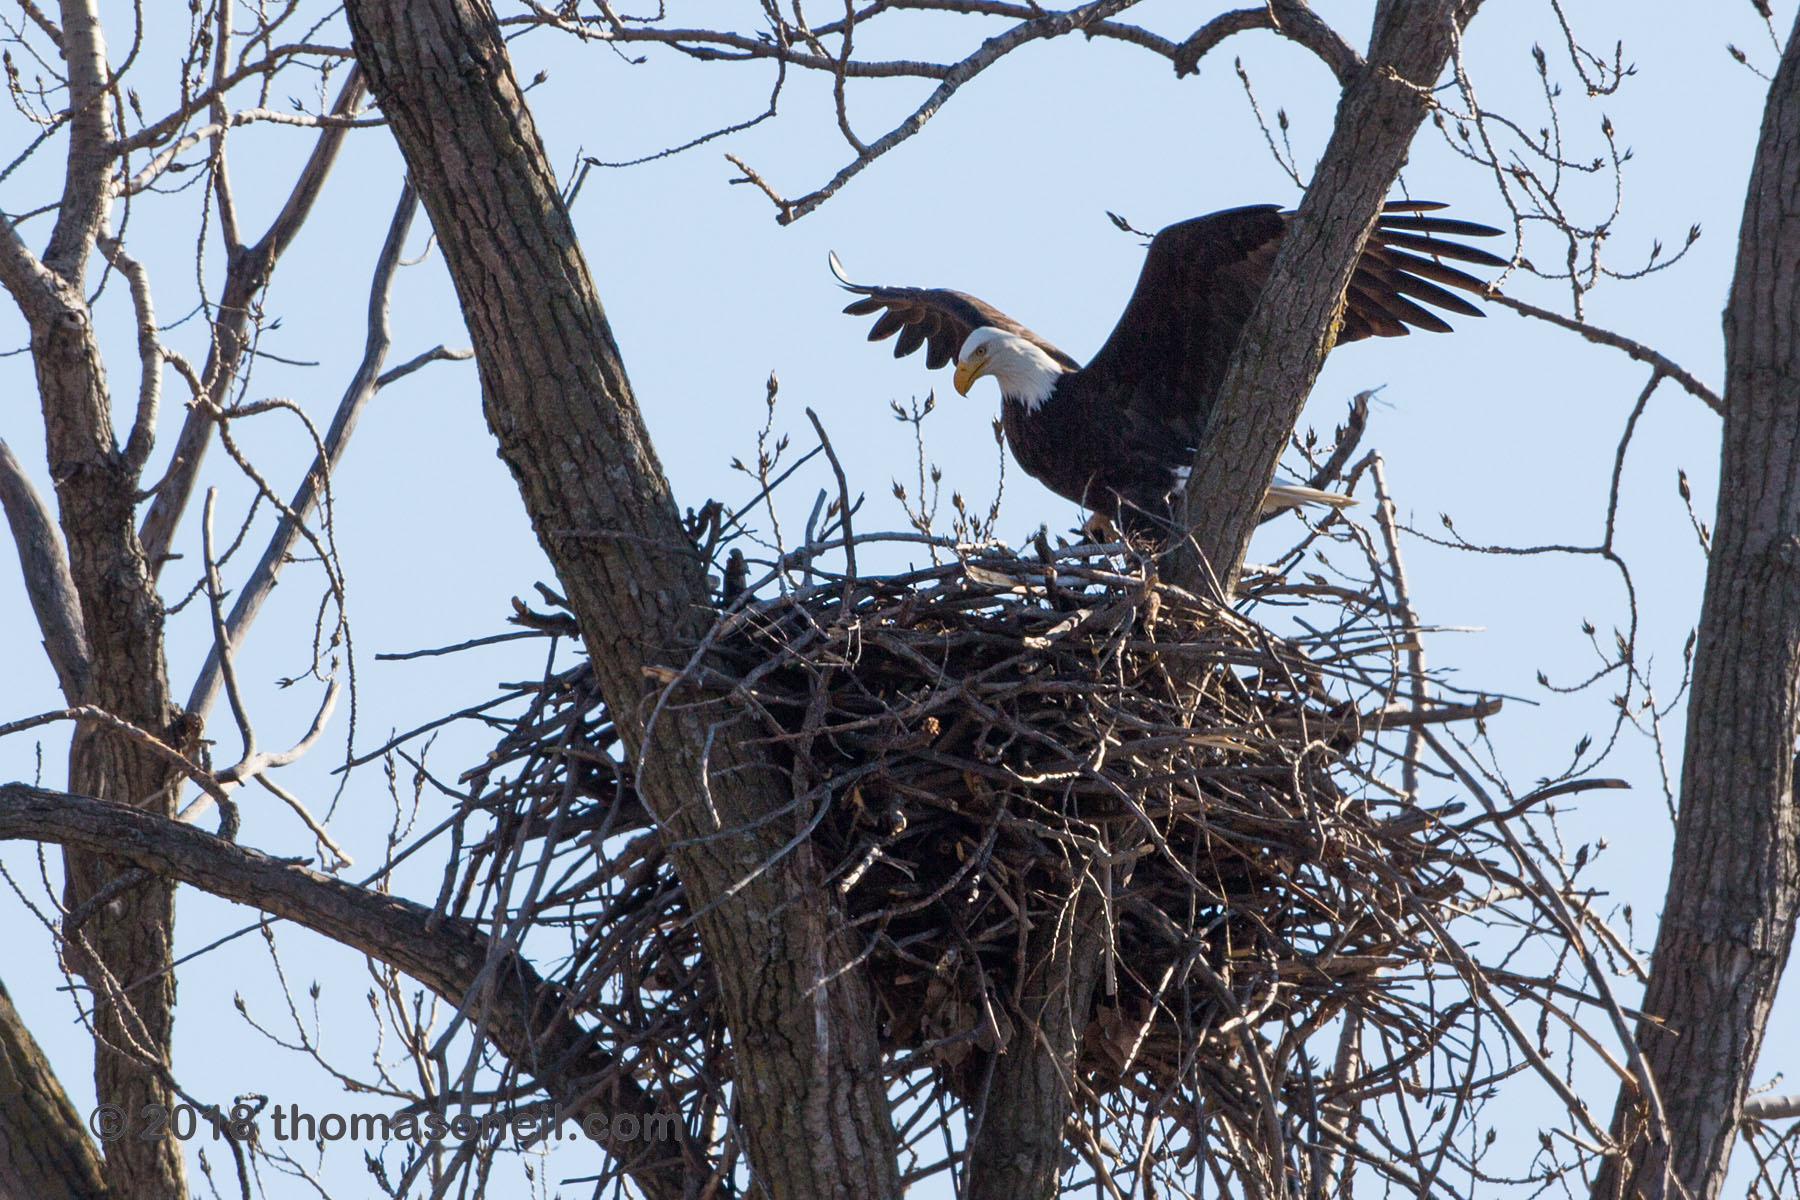 Bald eagle lands in the nest, Loess Bluffs National Wildlife Refuge, Missouri.  Click for next photo.